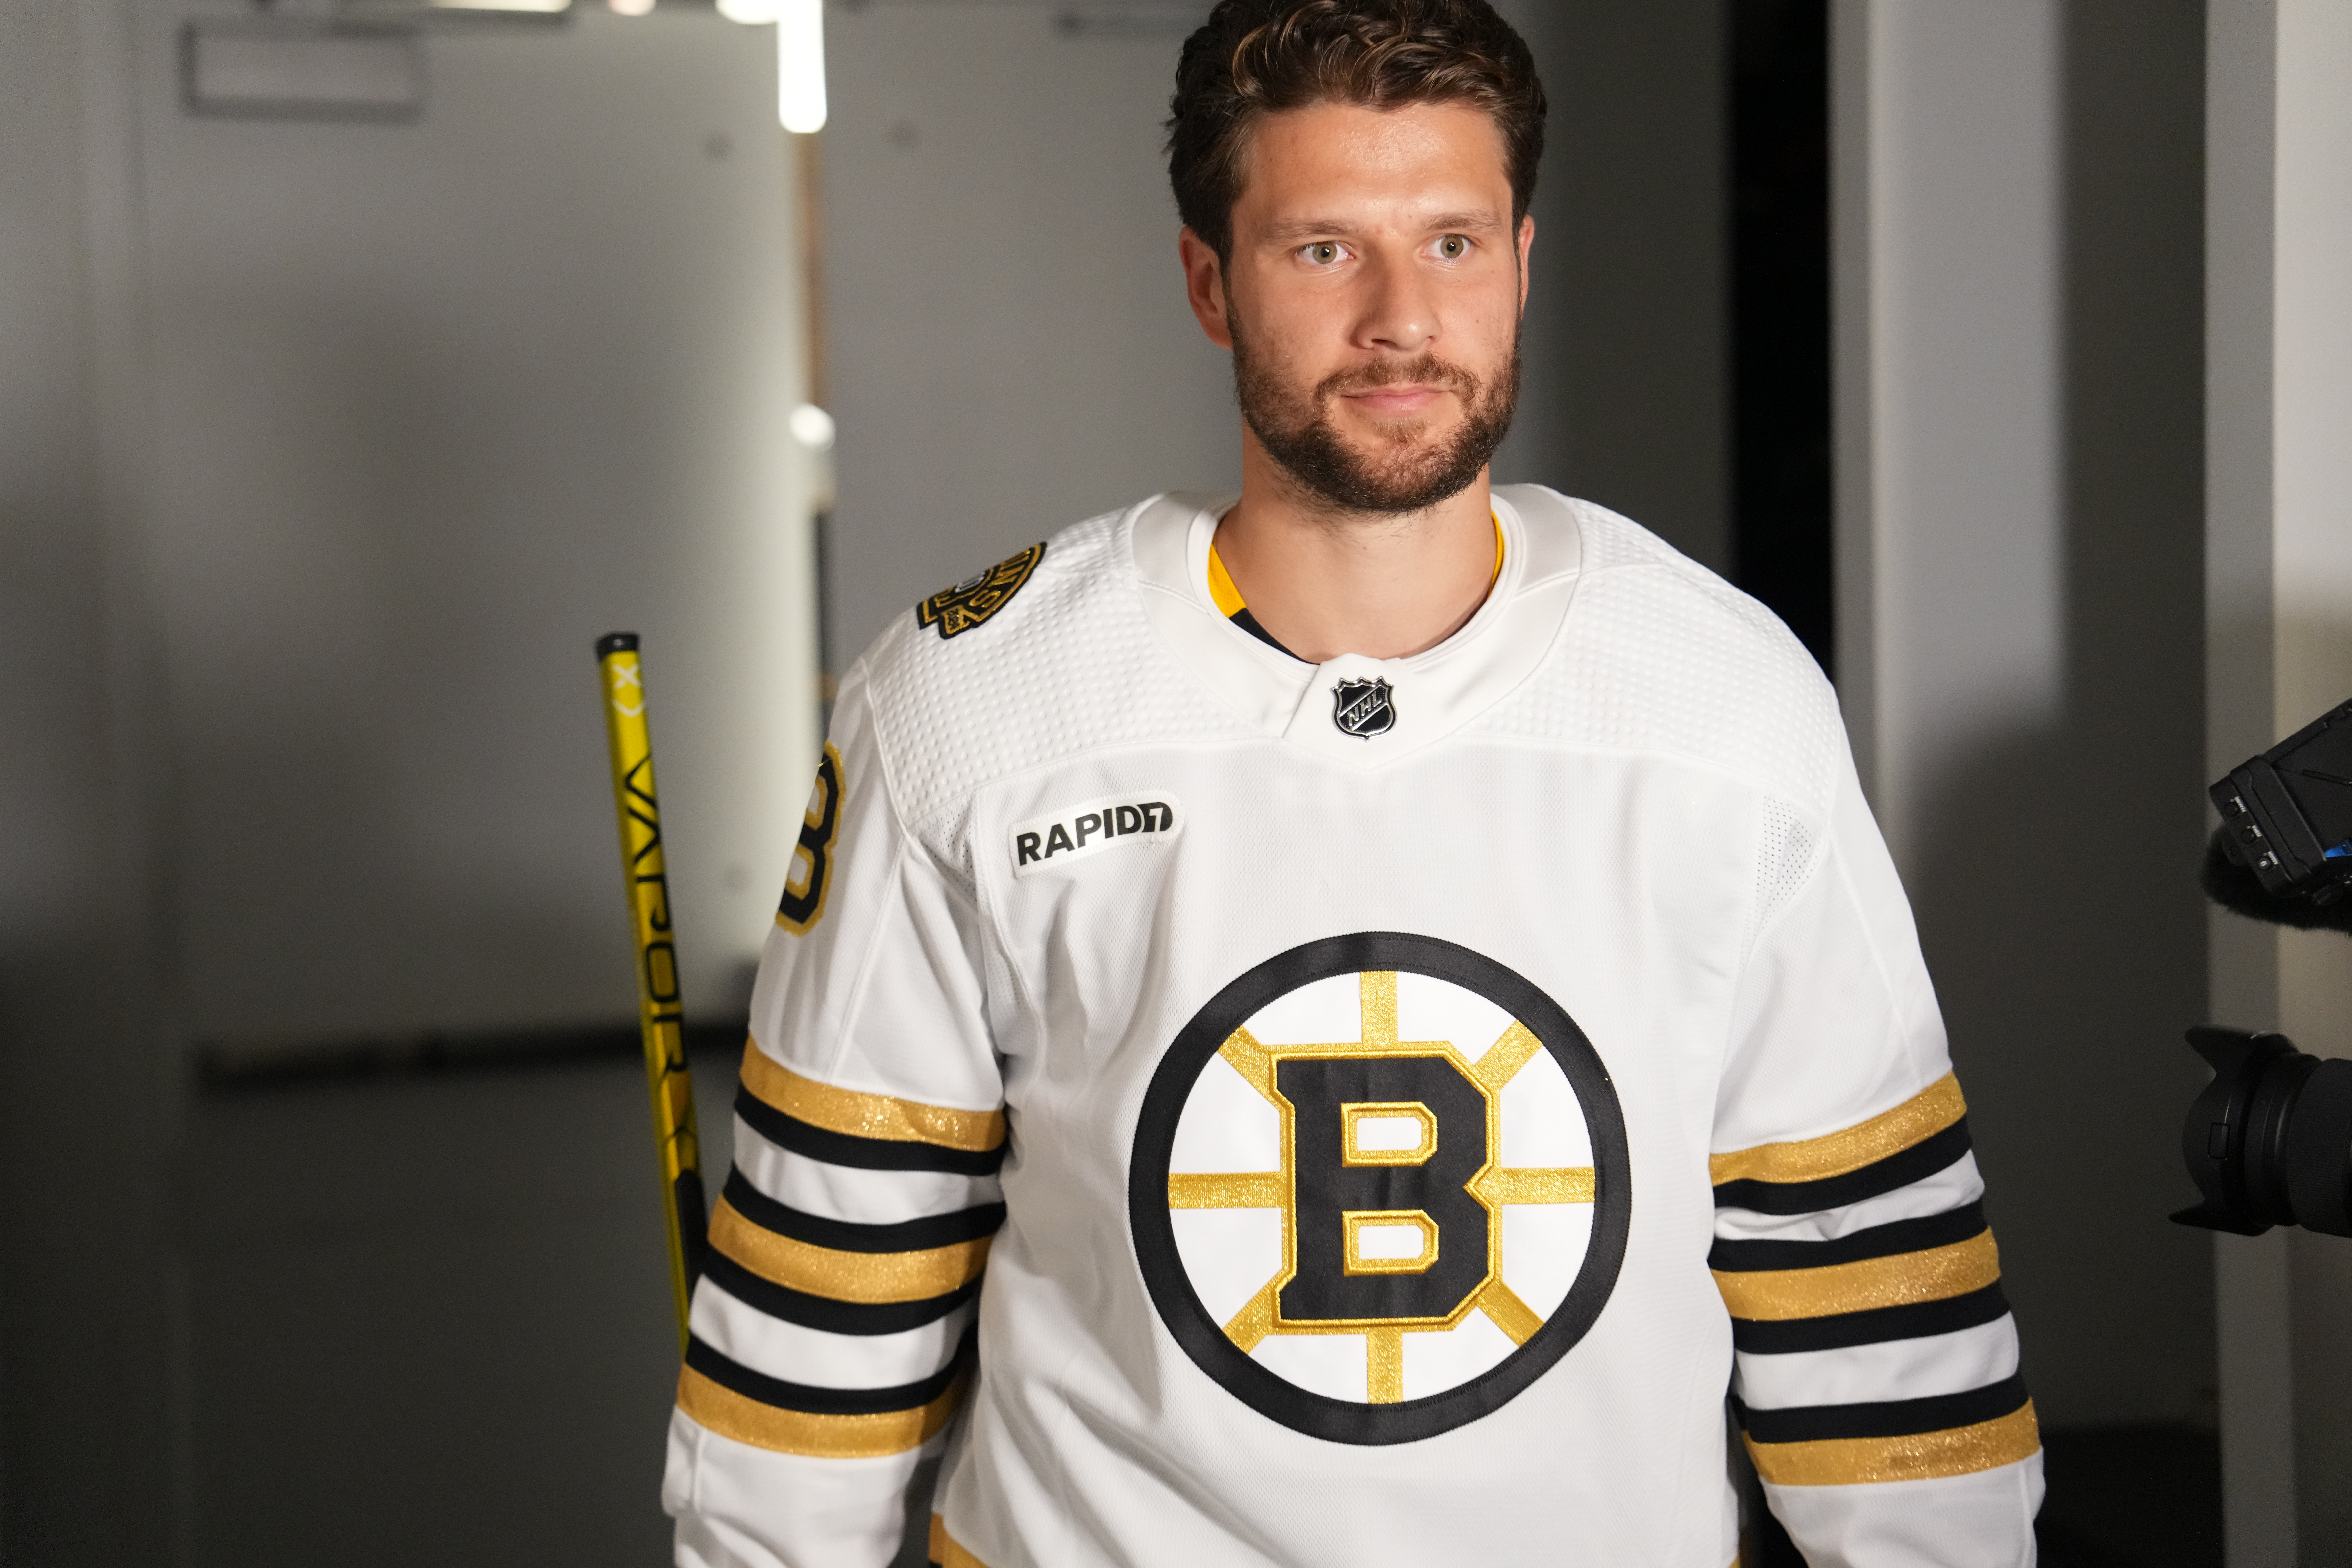  Boston Bruins officially unveil new third jersey